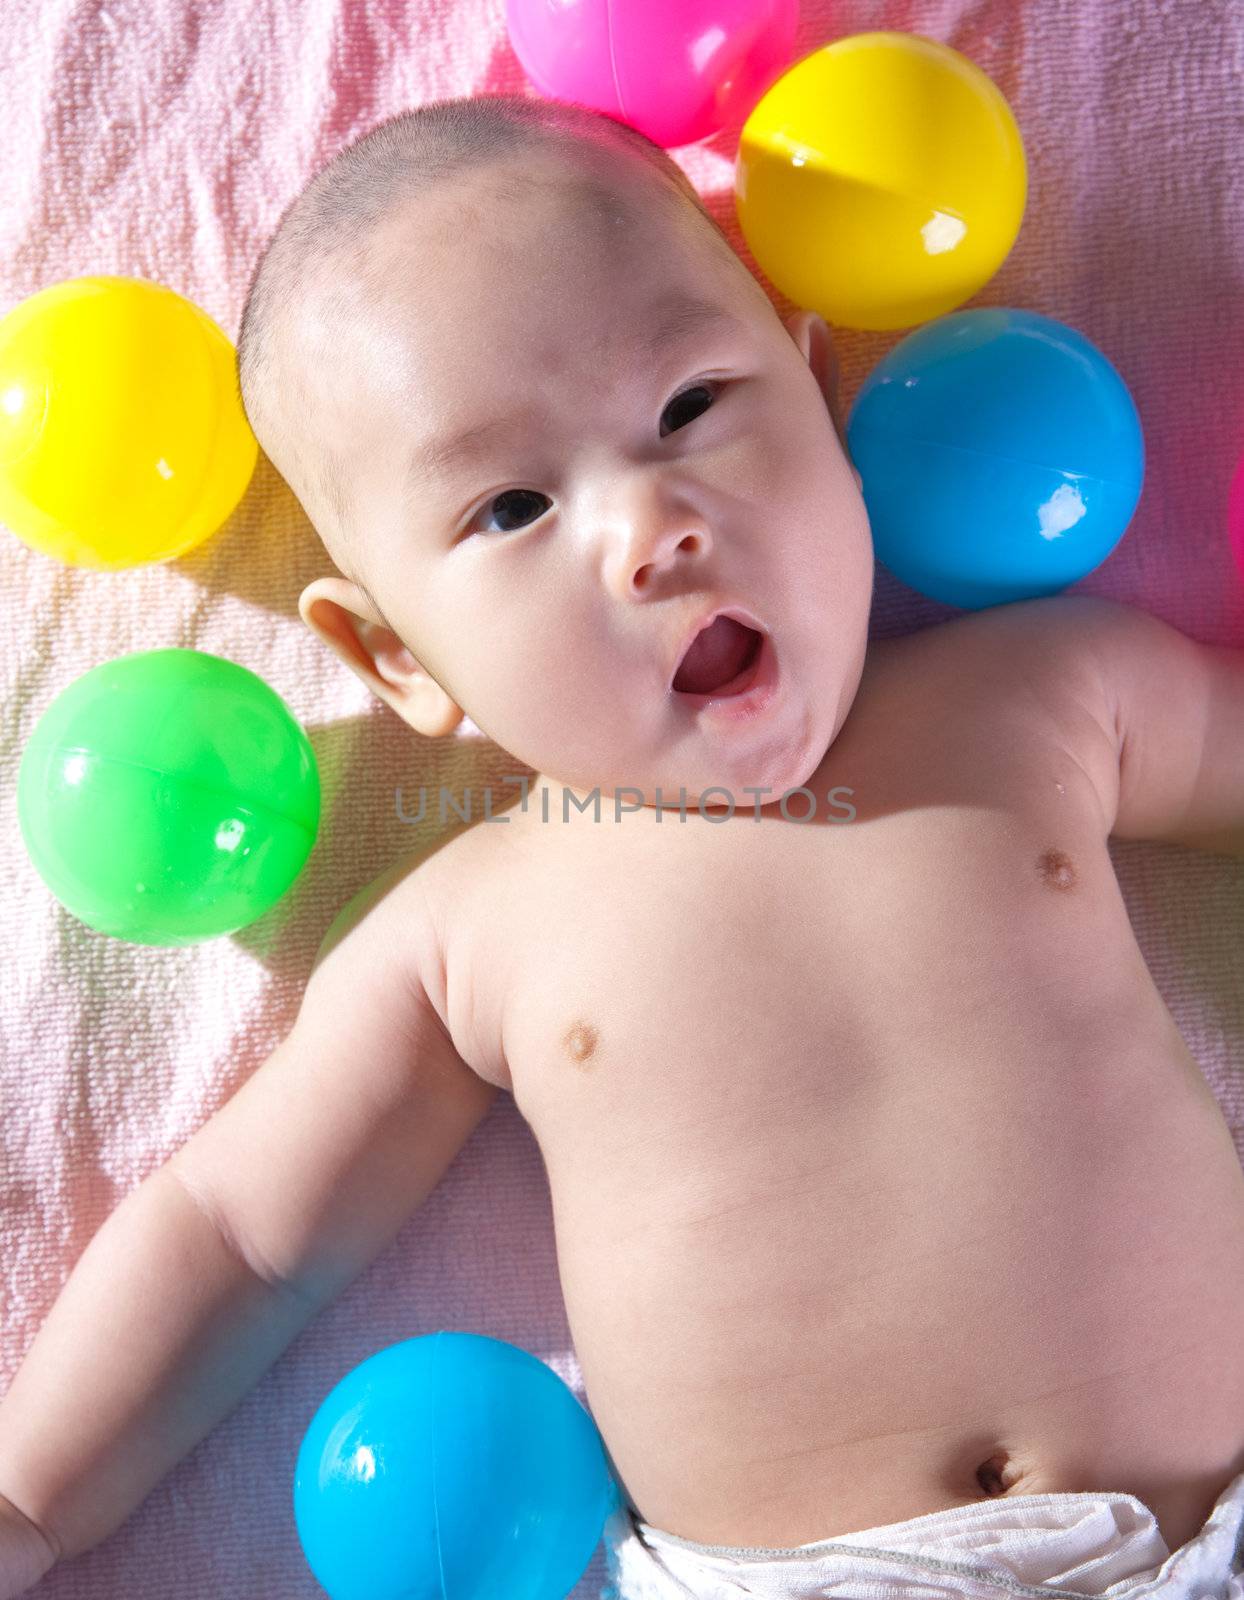 A happy 3 months old baby in a bath of balls.